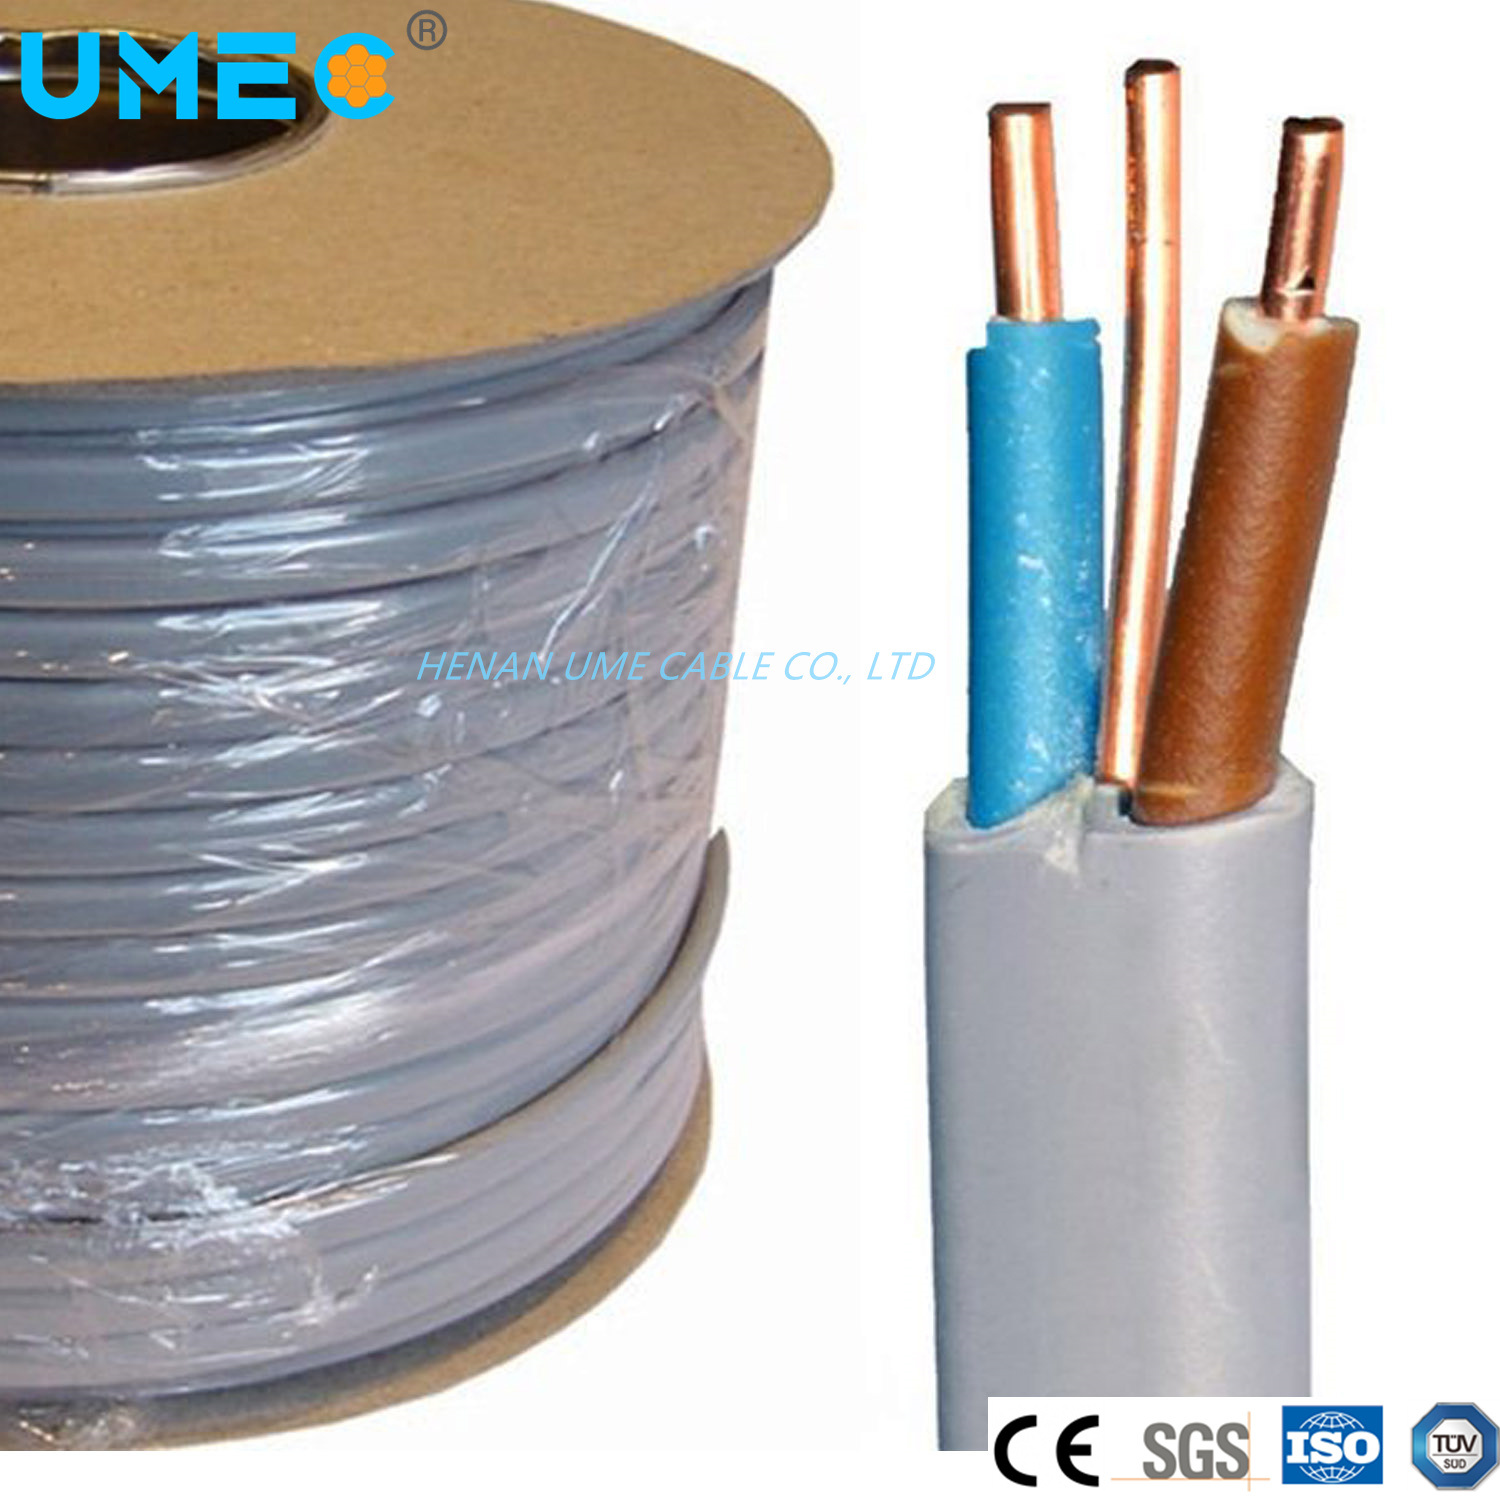 2.5mm2 Electric Wire Cable Flat Solid or Stranded Copper Twin and Earth Electrical Cable